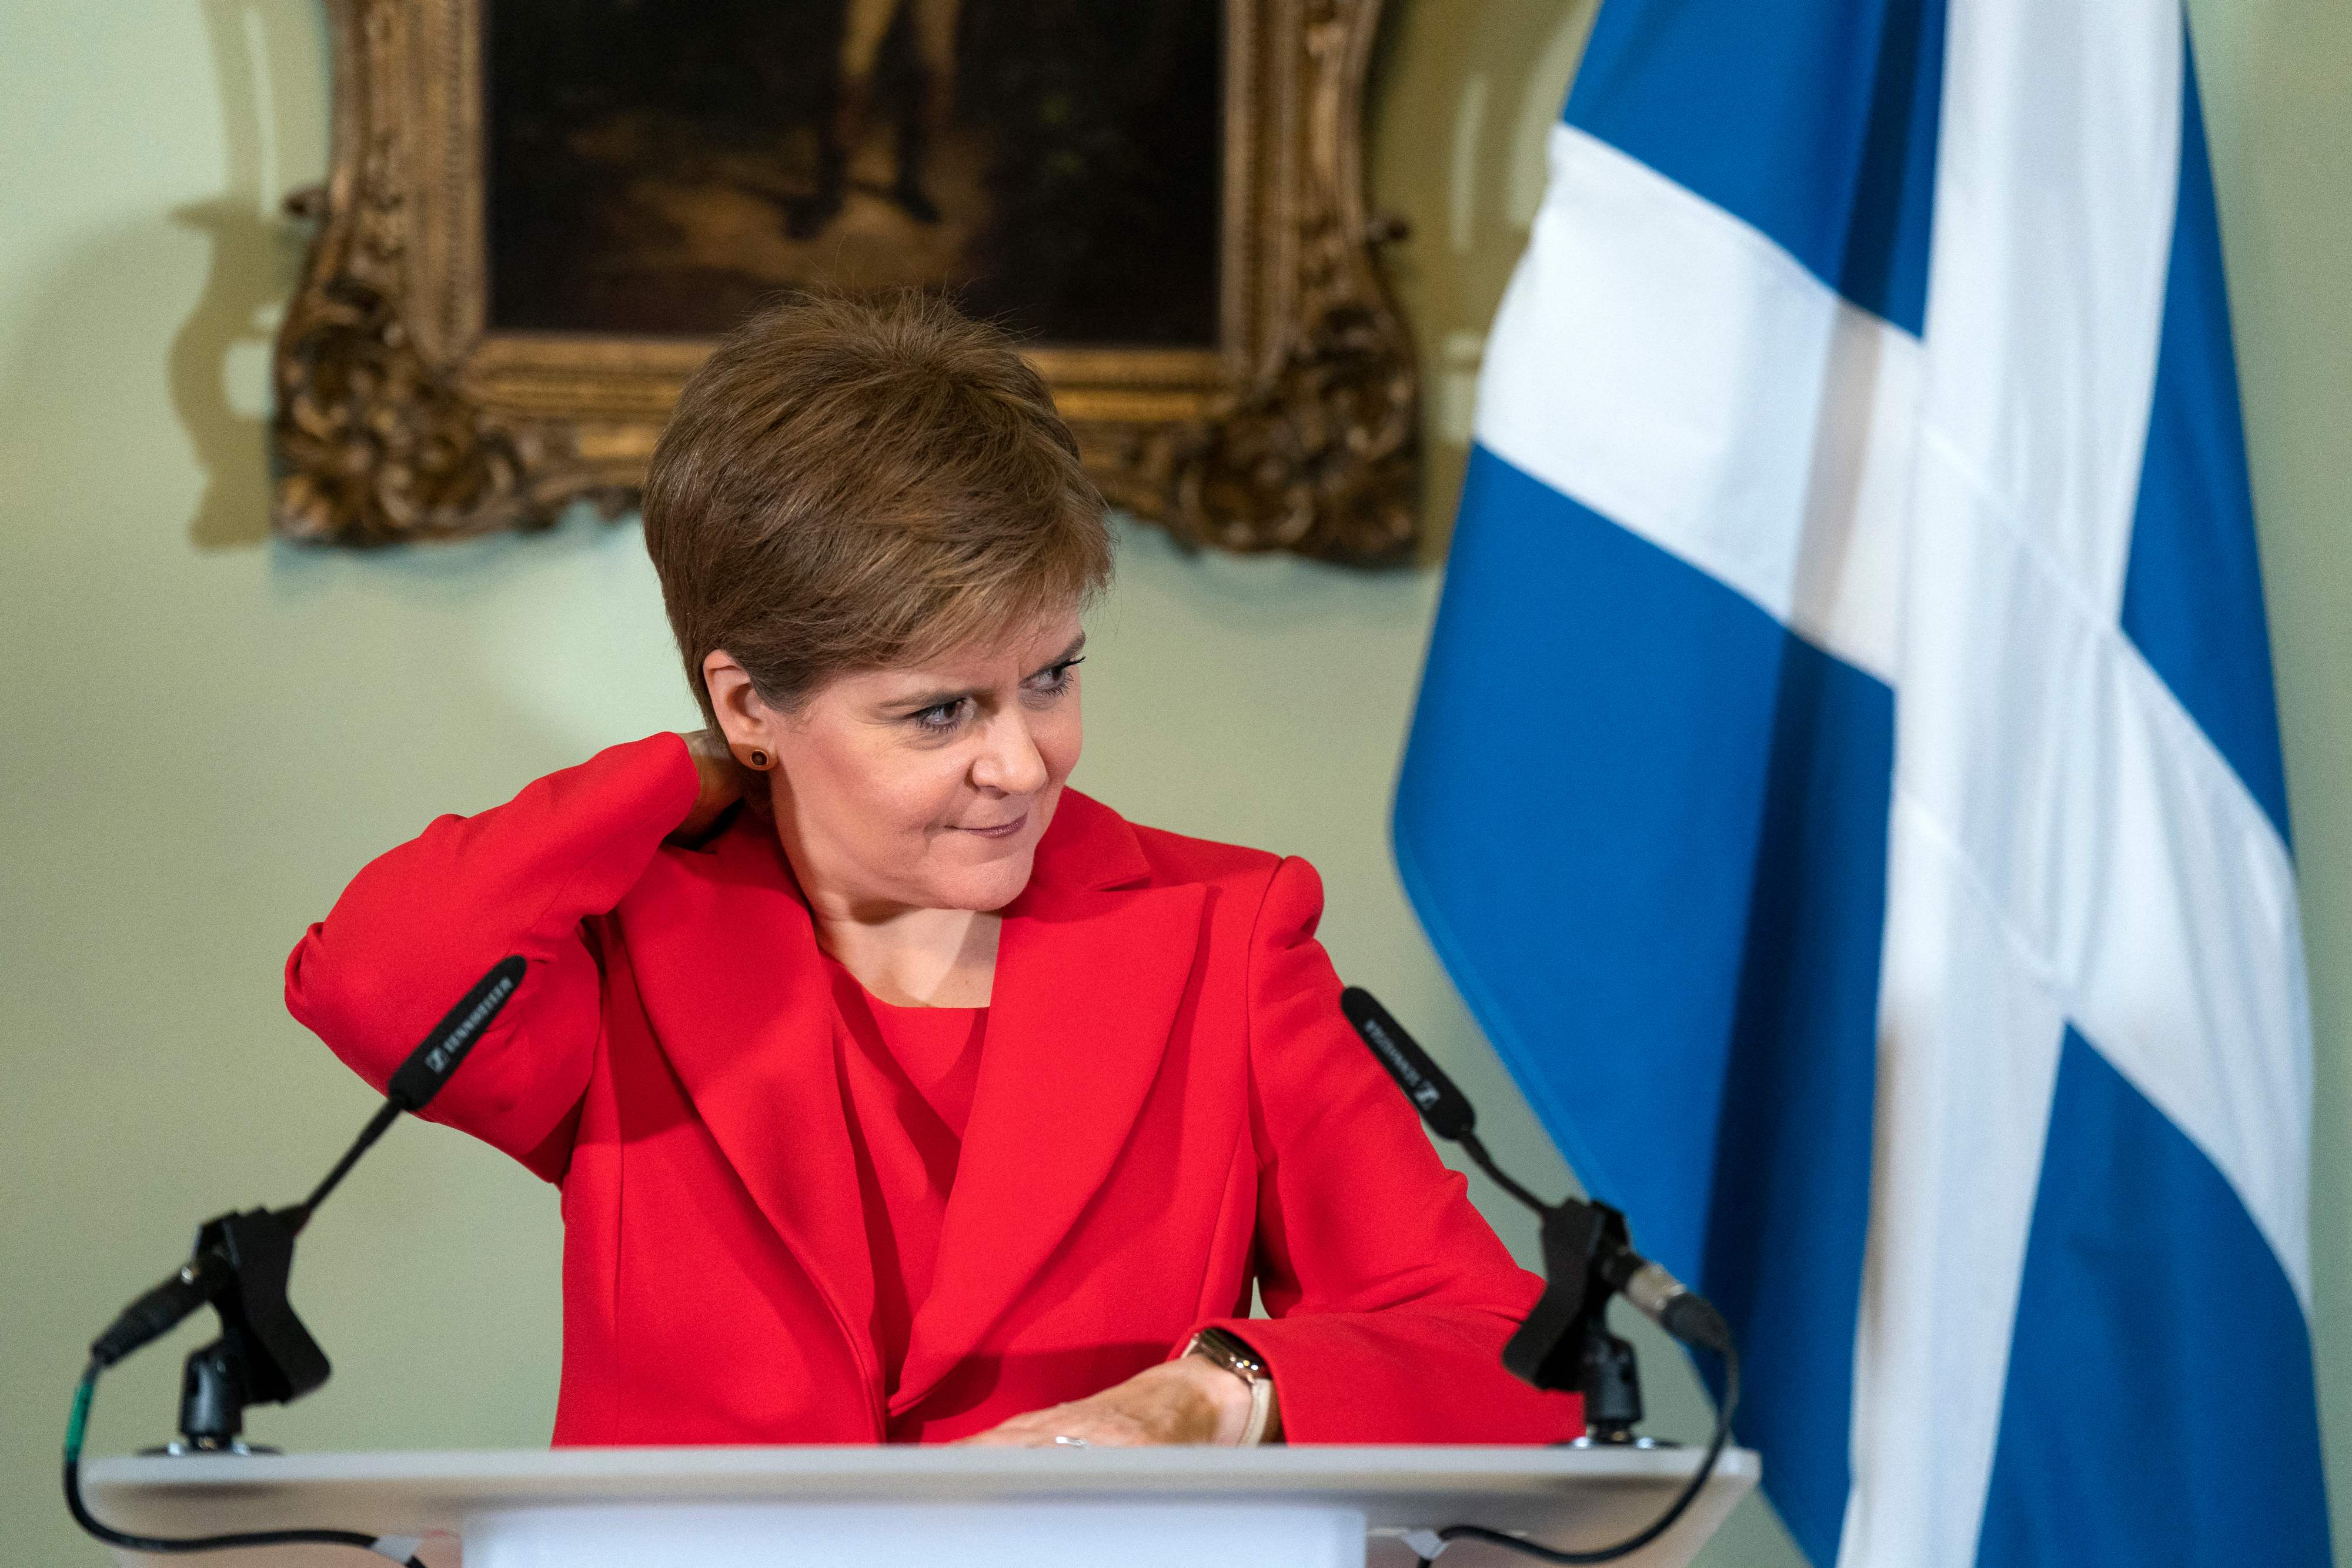 It seems many candidates are avoiding the race to be Nicola Sturgeon’s successor